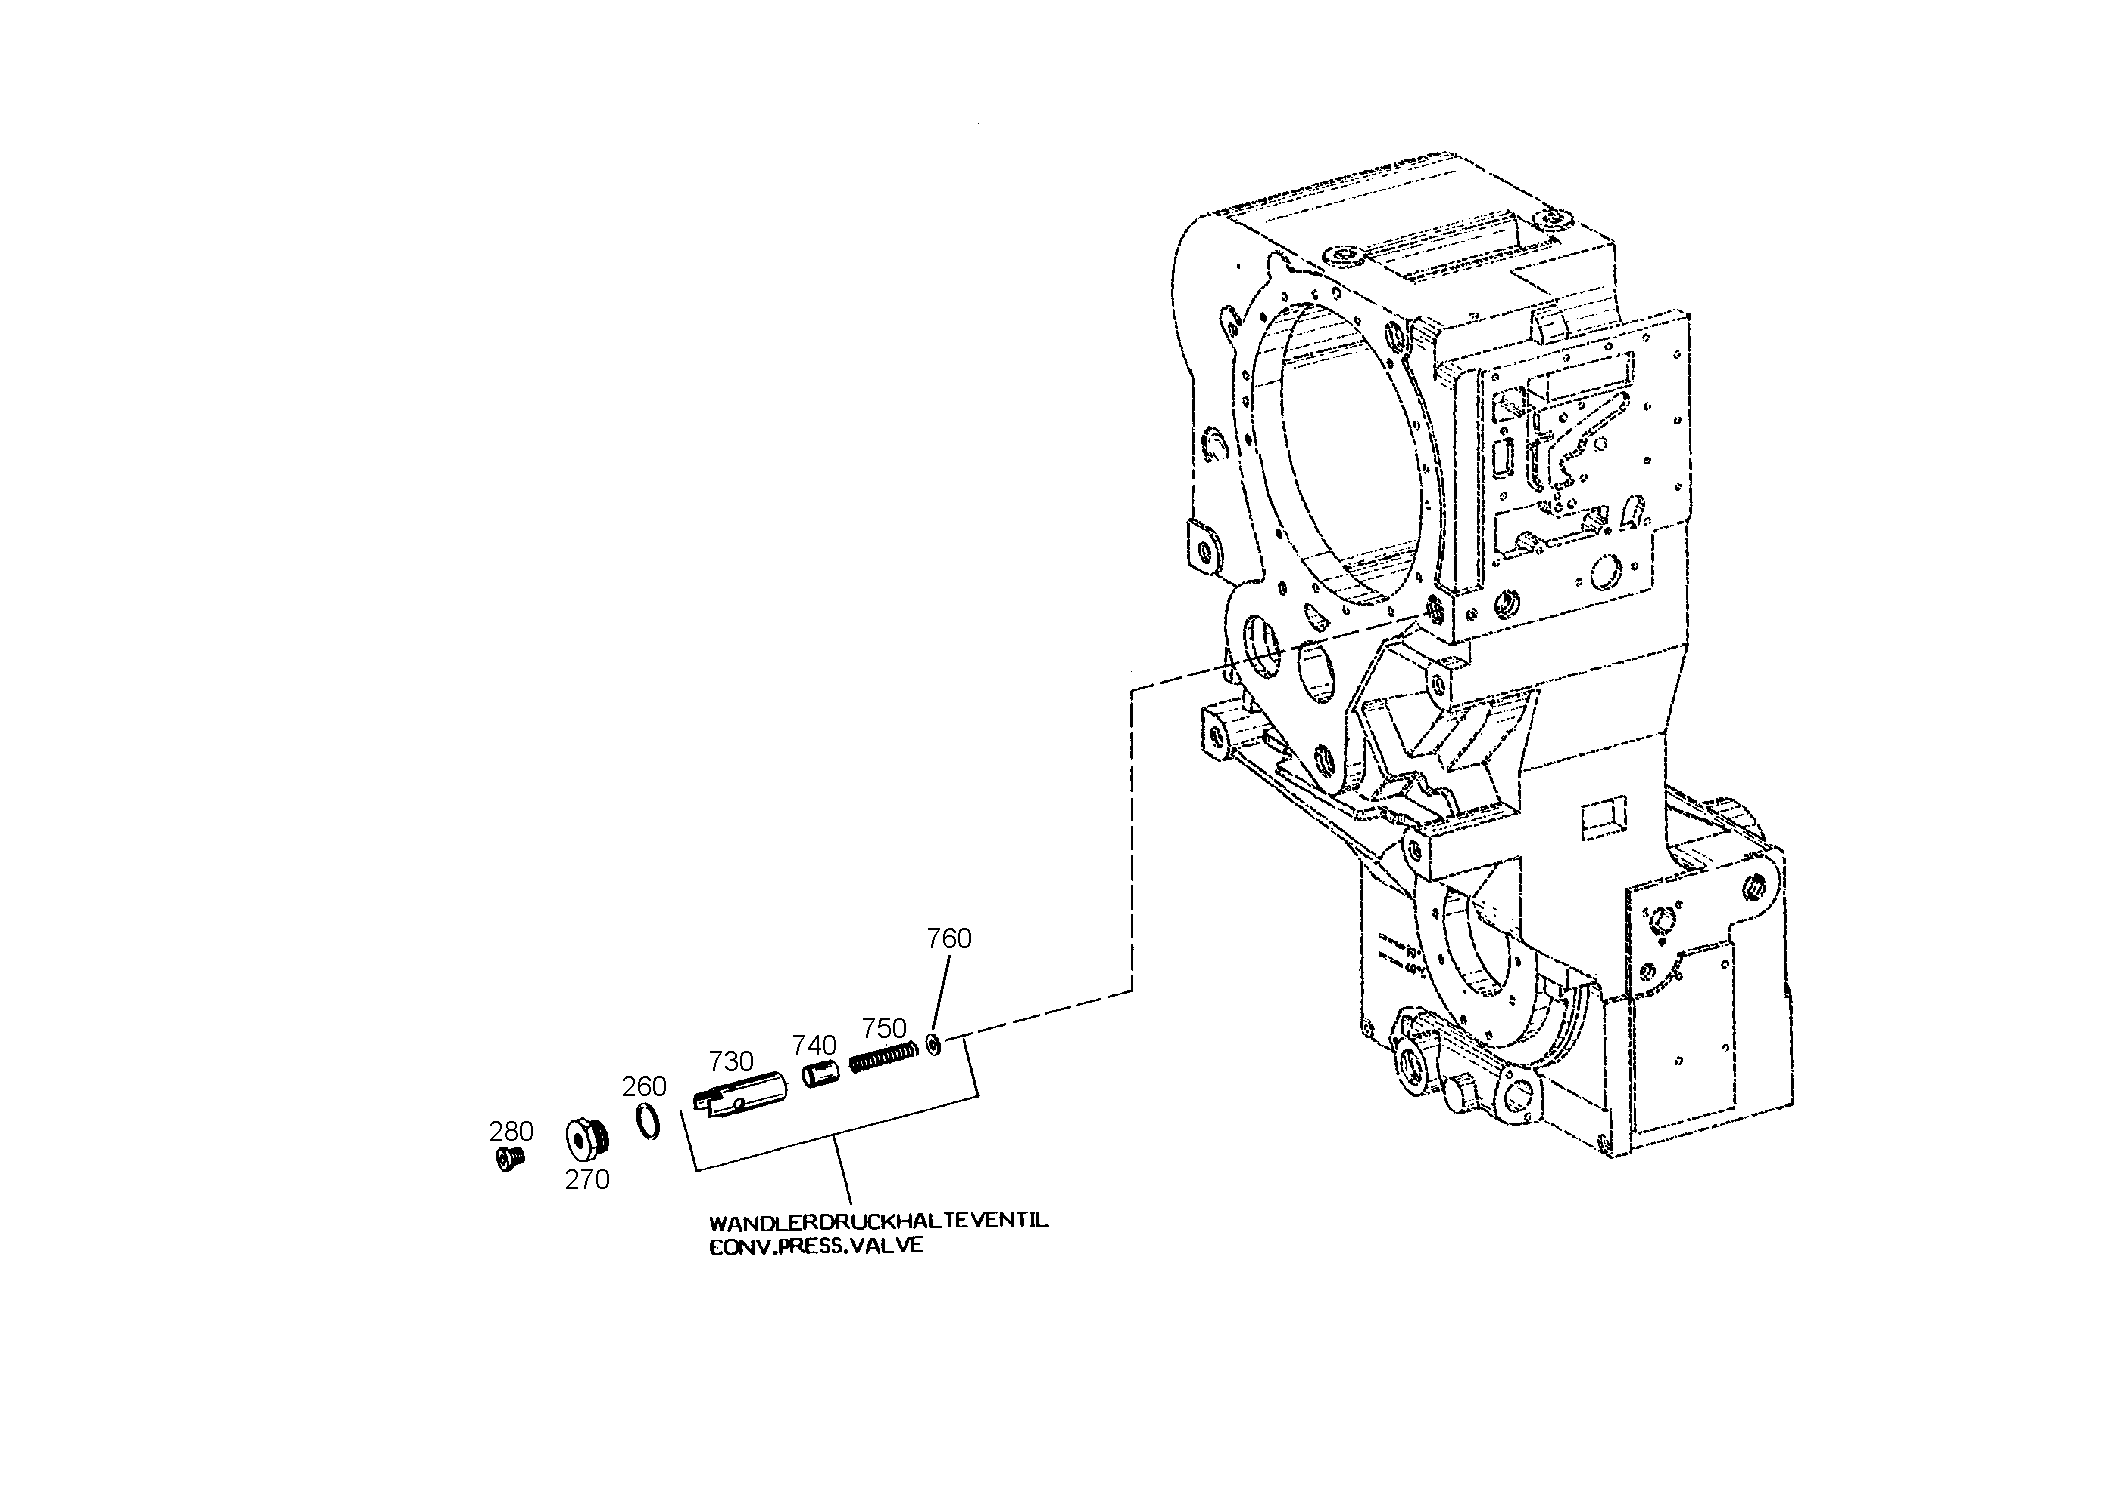 drawing for DOOSAN 0630 001 017 - WASHER (figure 2)